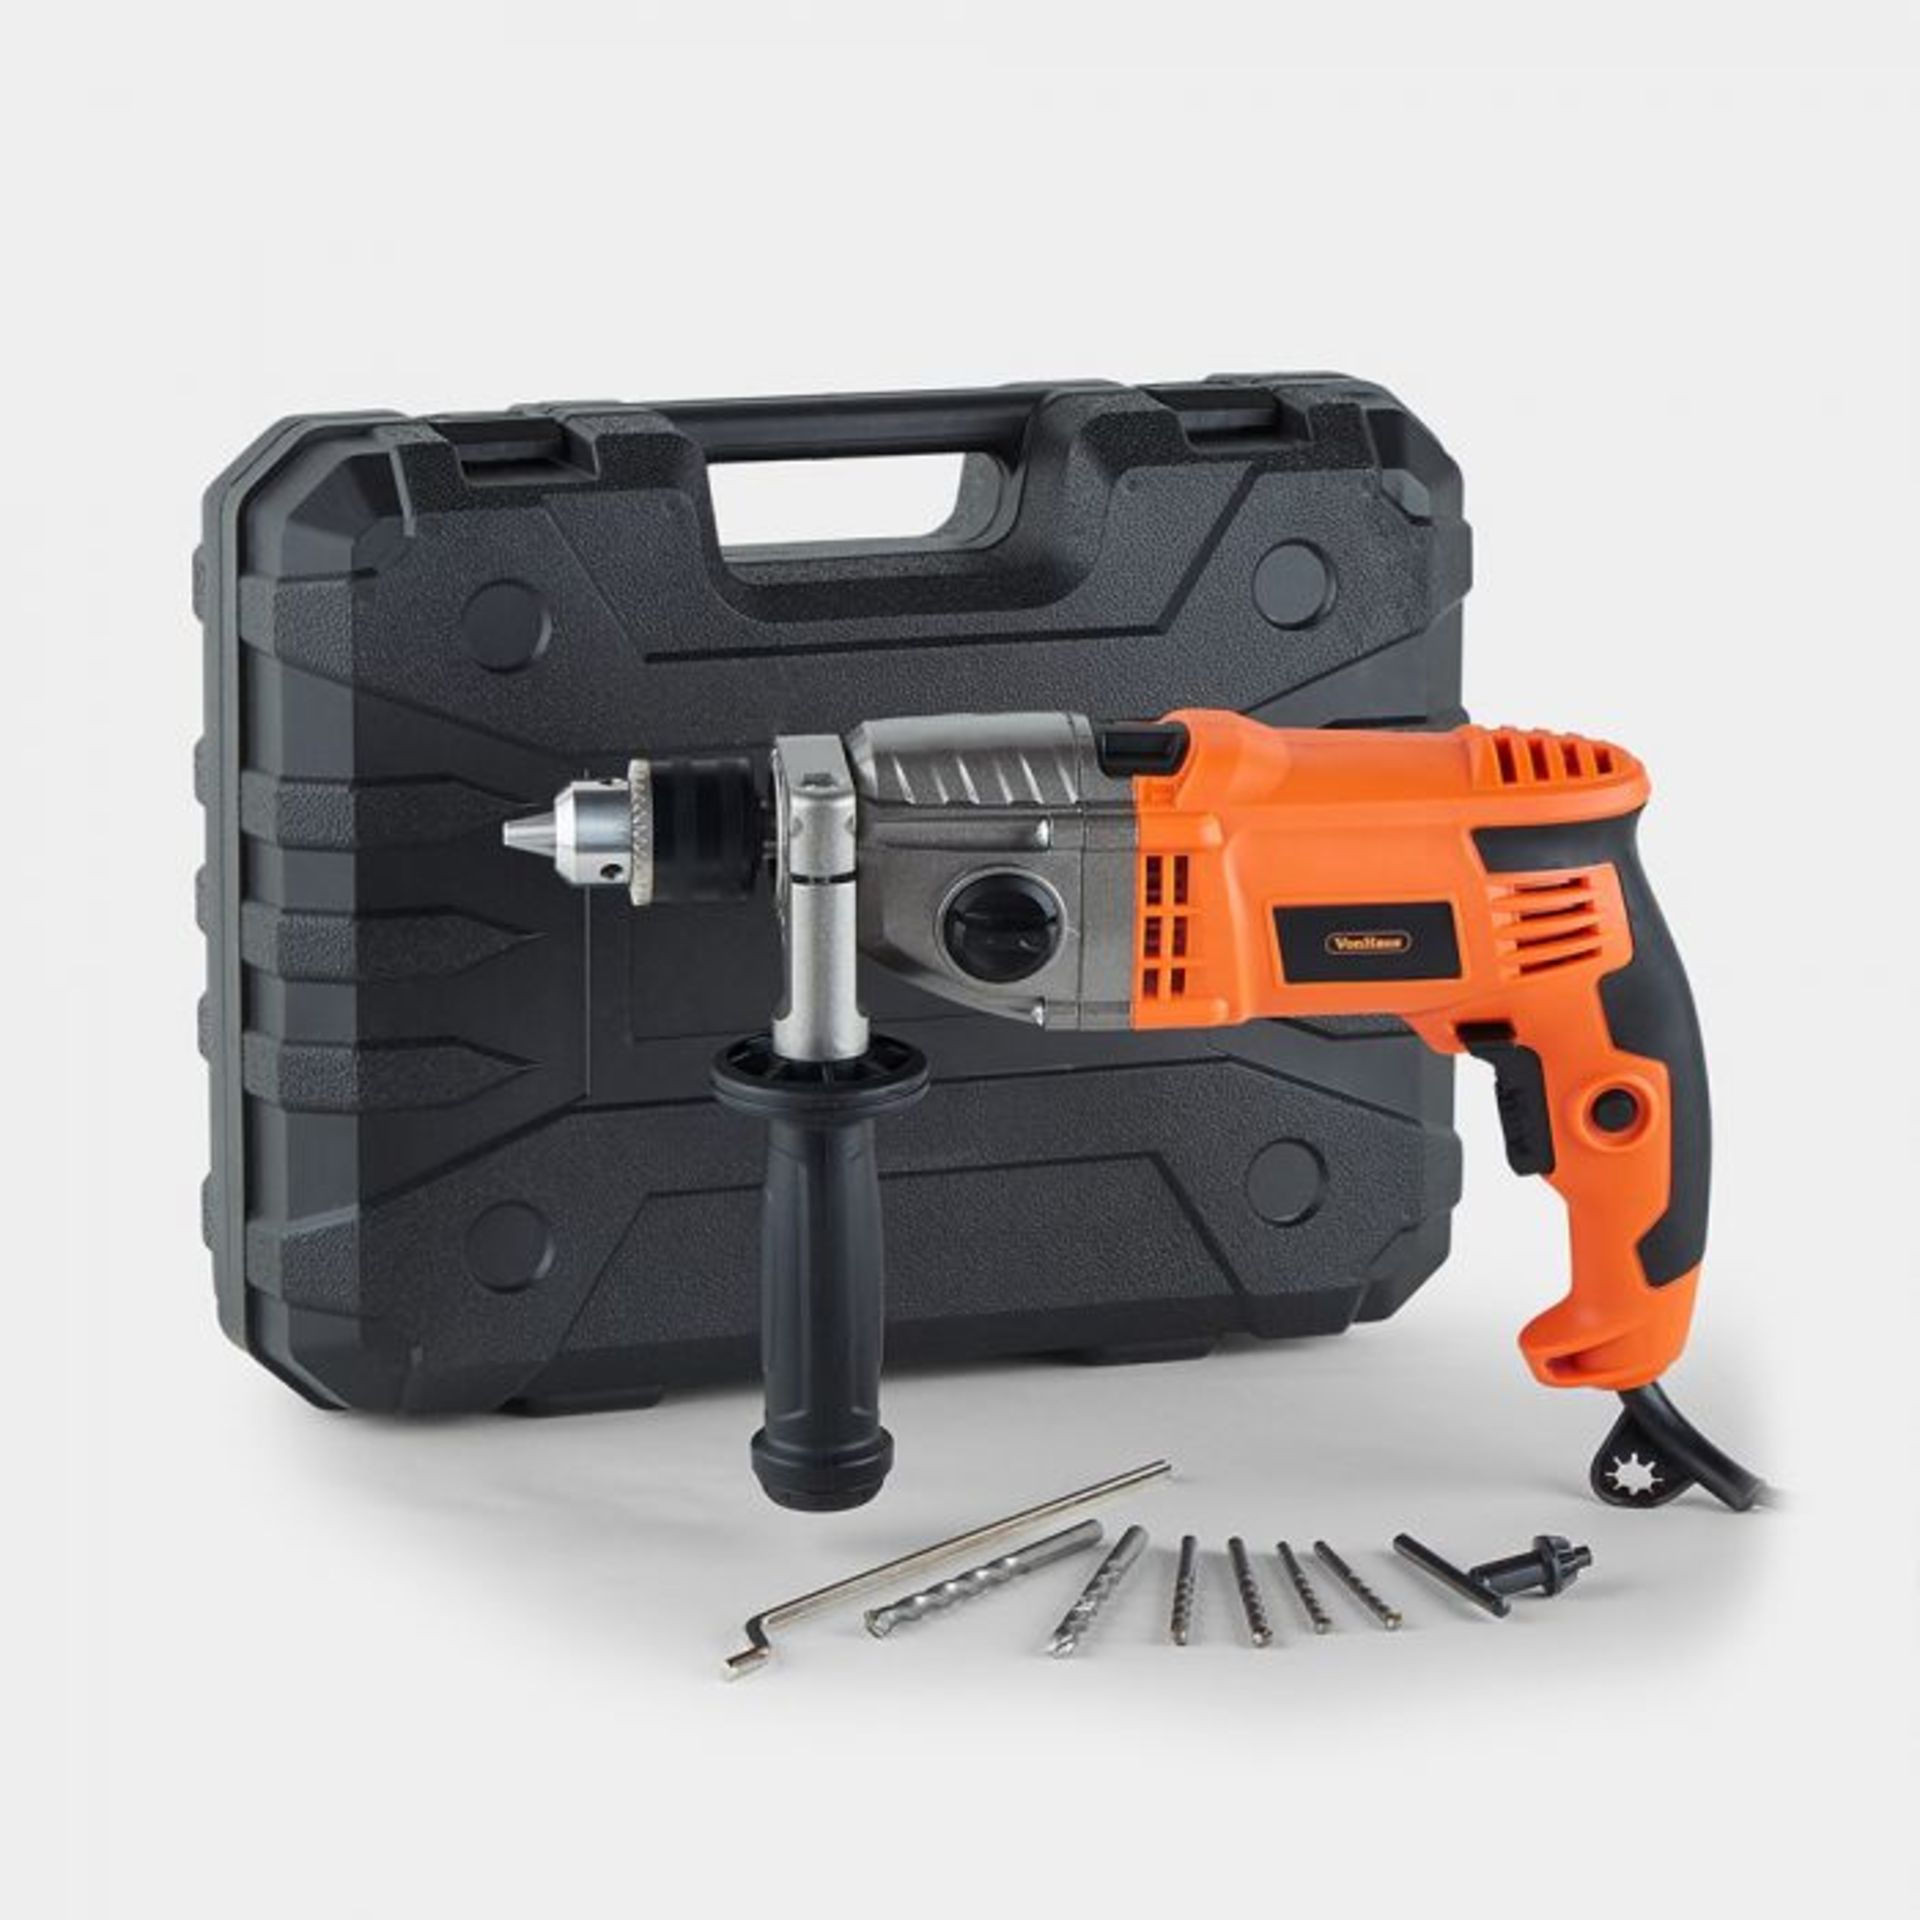 1200w 2 Speed Impact Drill. The dual drill or hammer function, high quality 13mm keyed chuck and 6